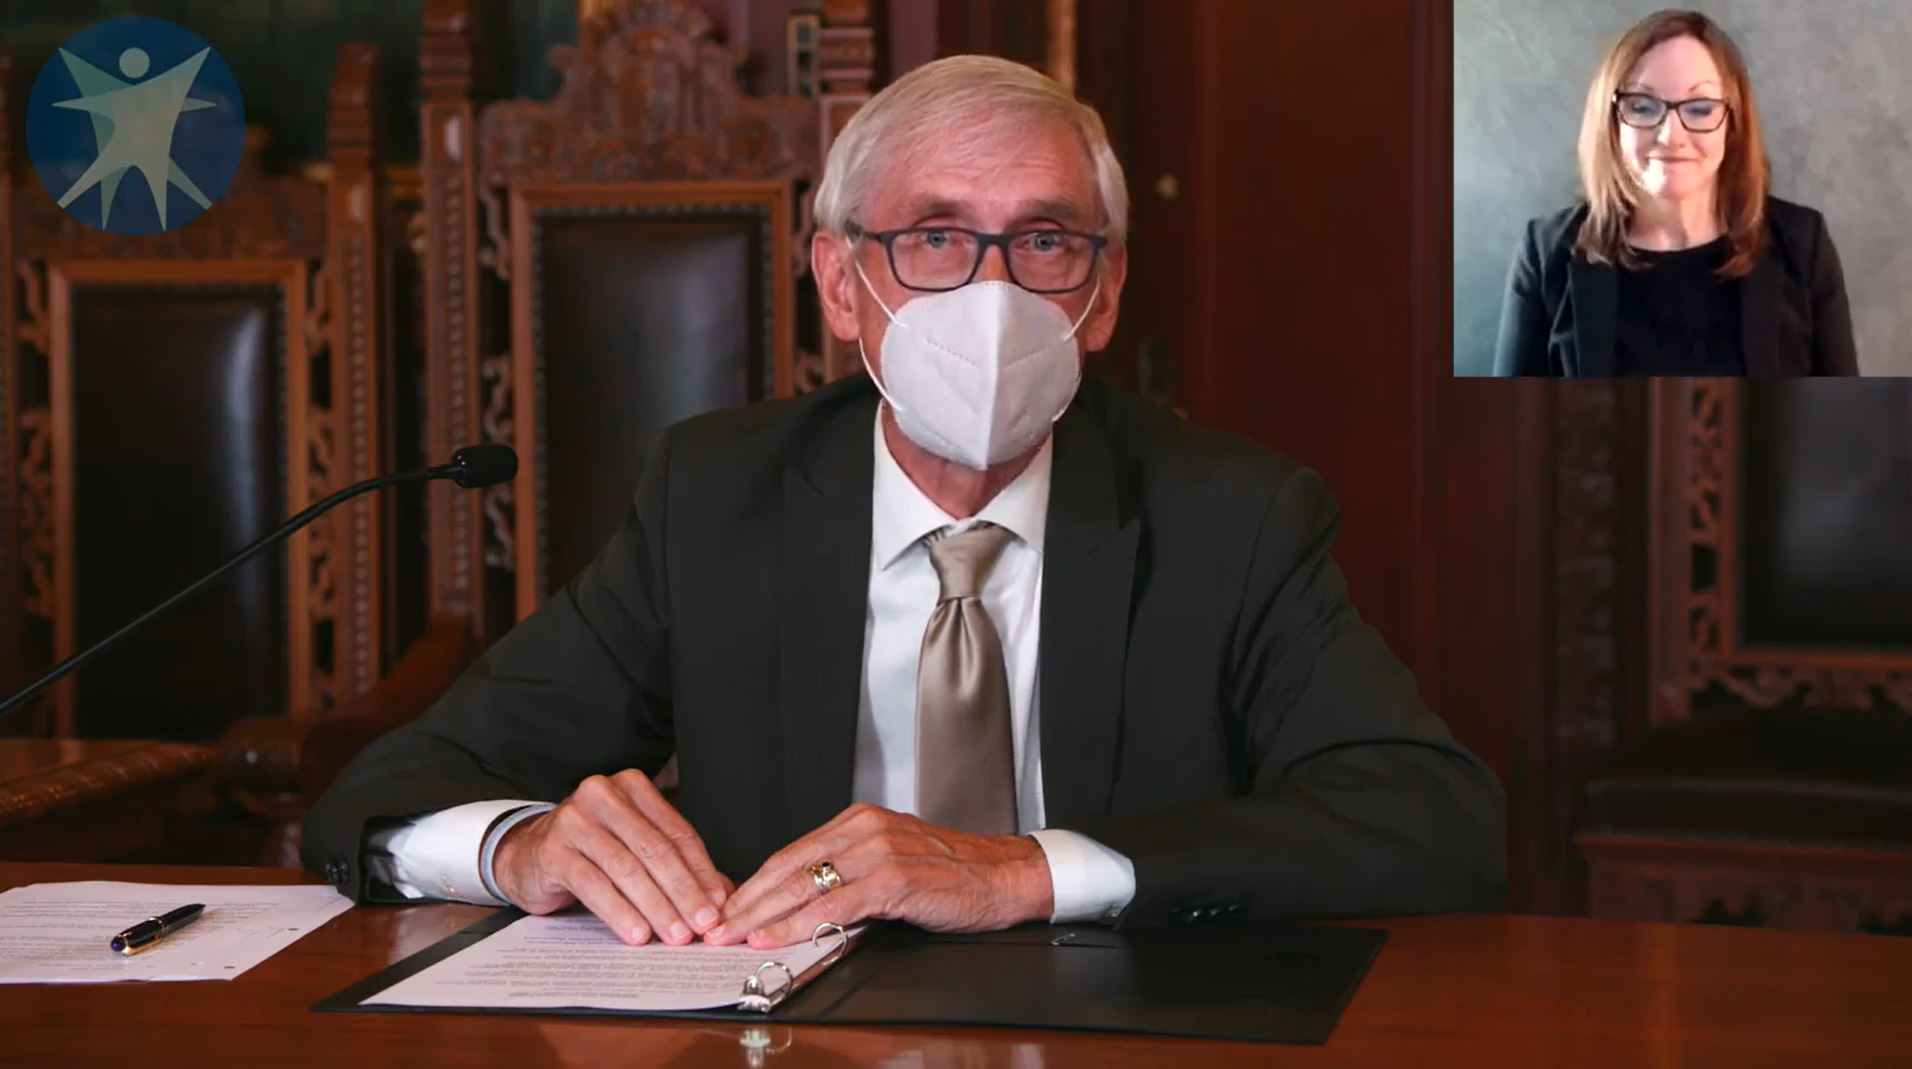 Governor Tony Evers addresses the public while wearing a mask